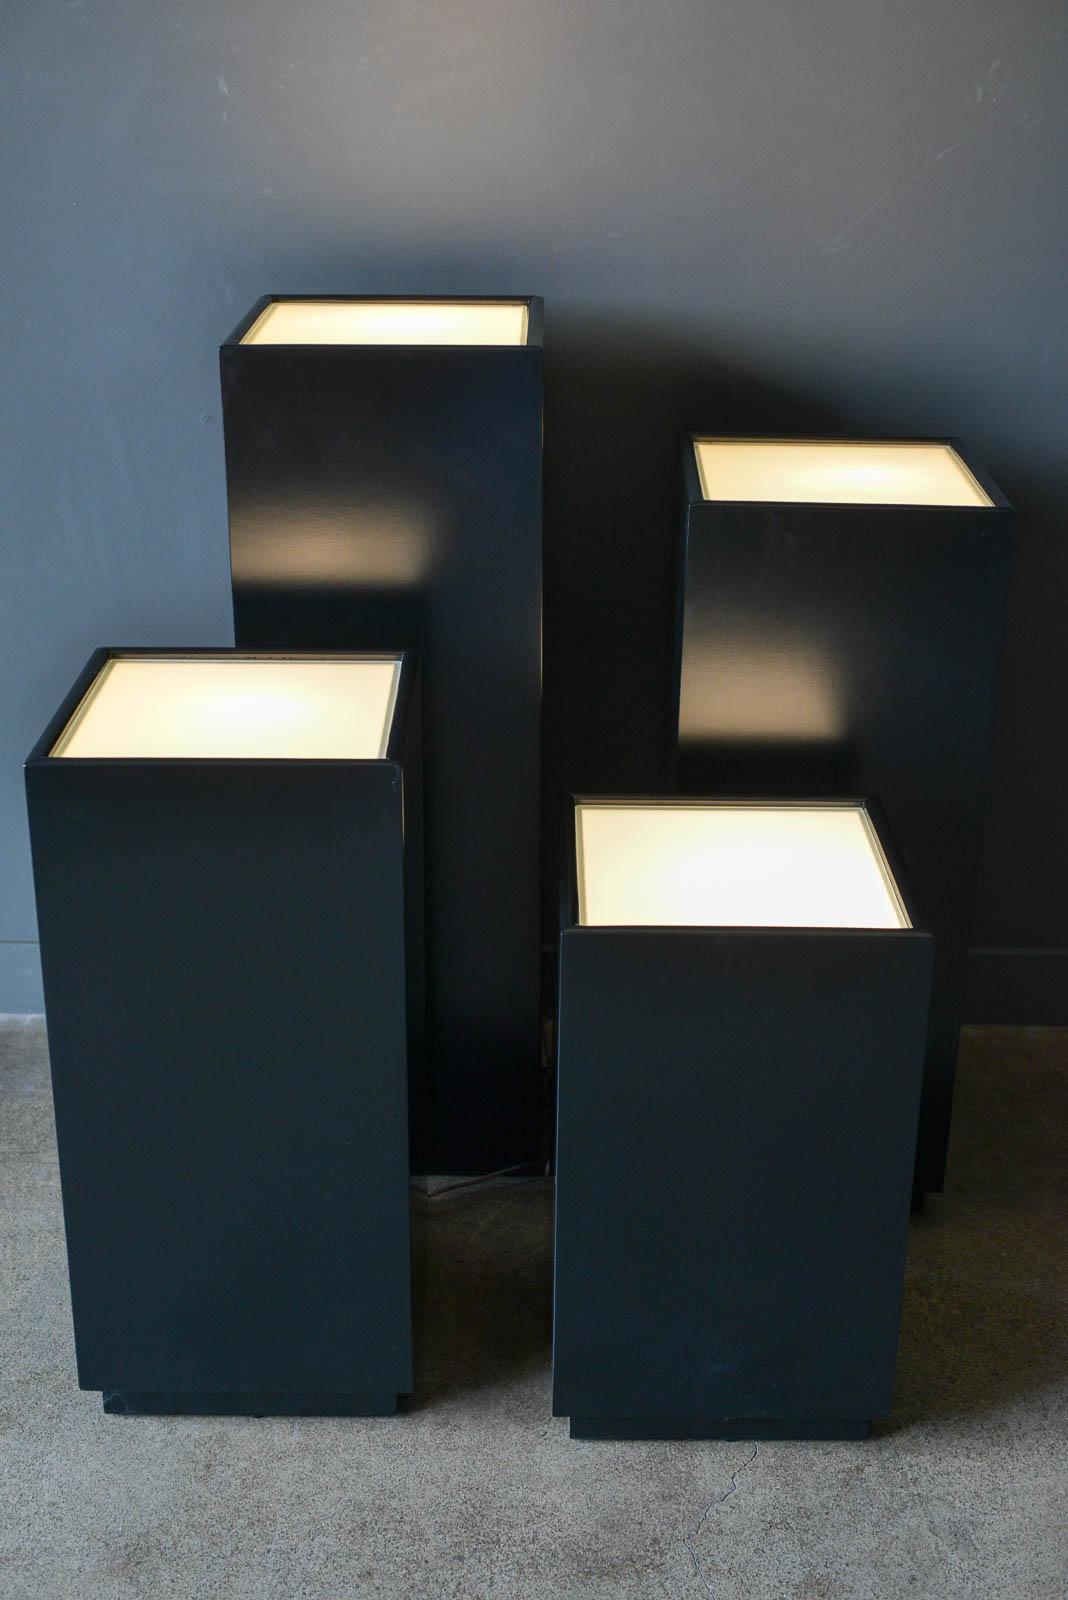 American Vintage Illuminated Display Pedestals by Albright and Zimmerman, ca. 1984 For Sale